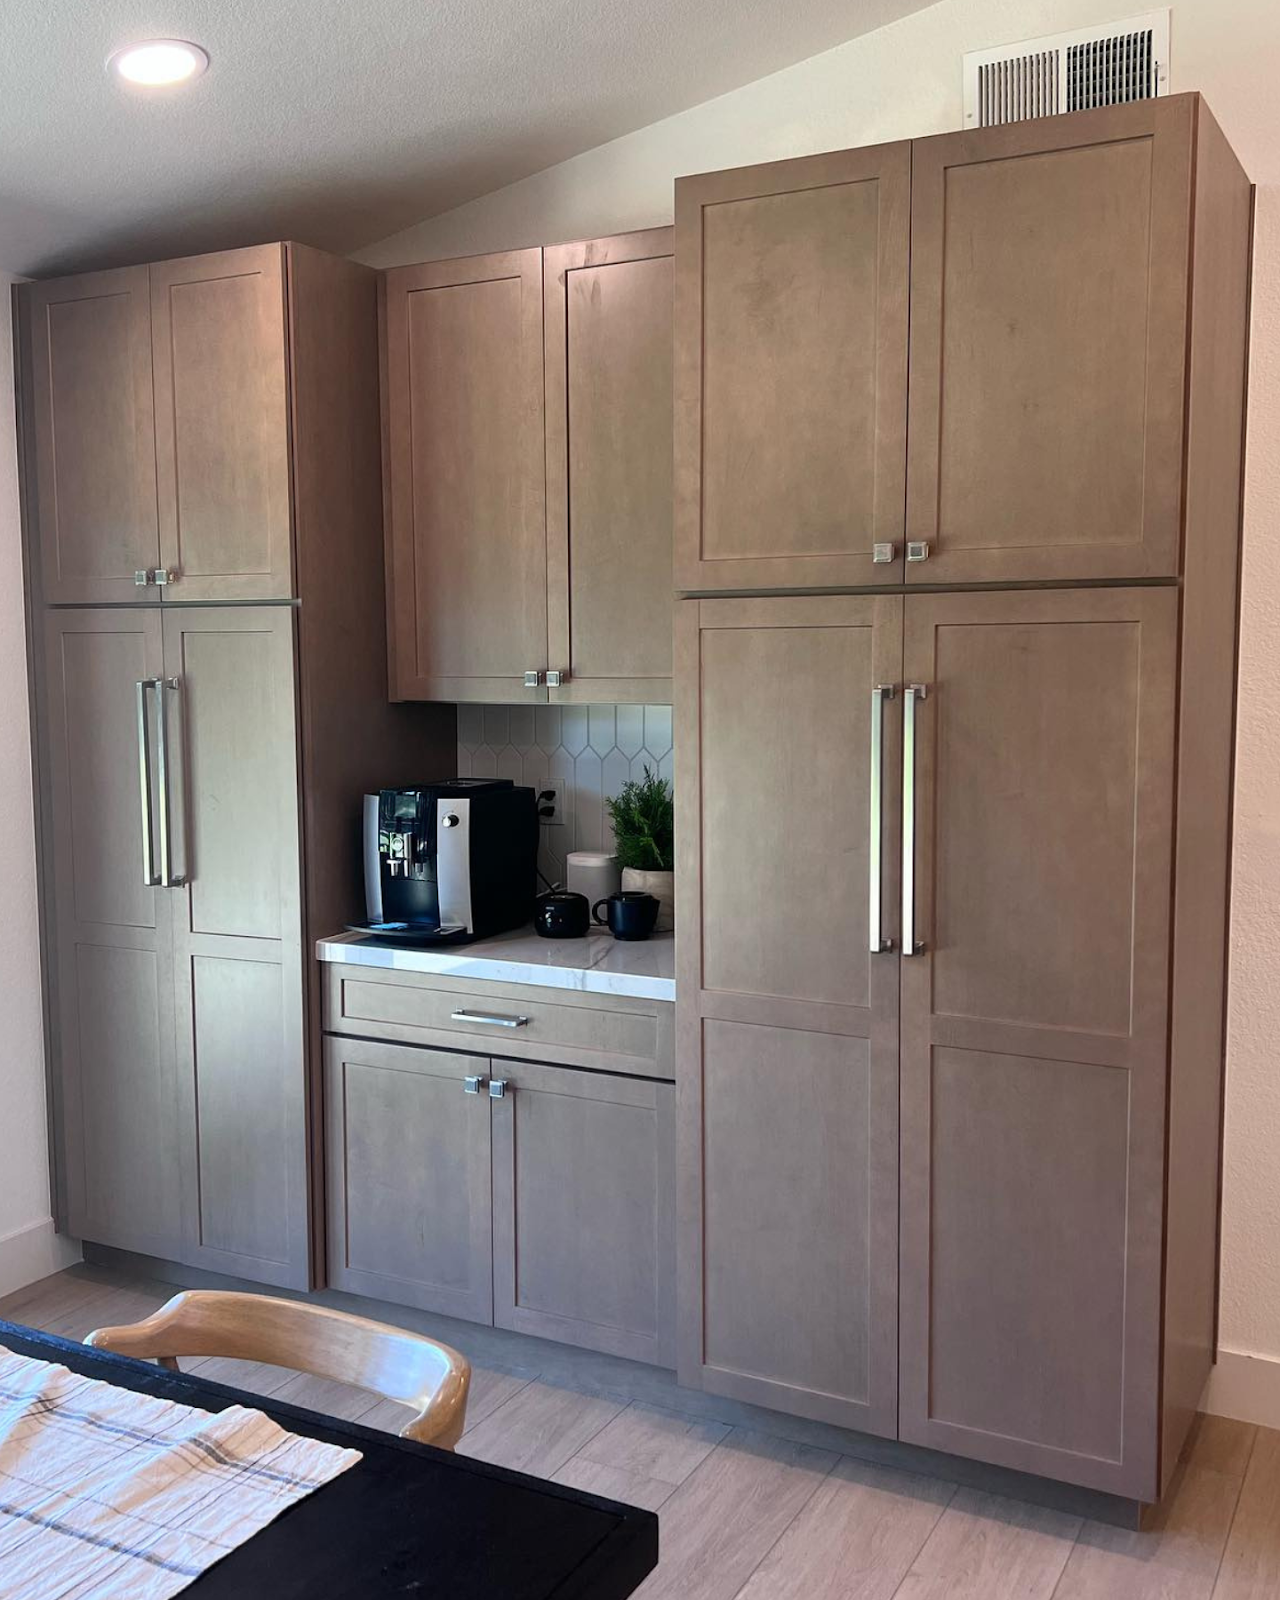 Cabinets with silver hardware finishes